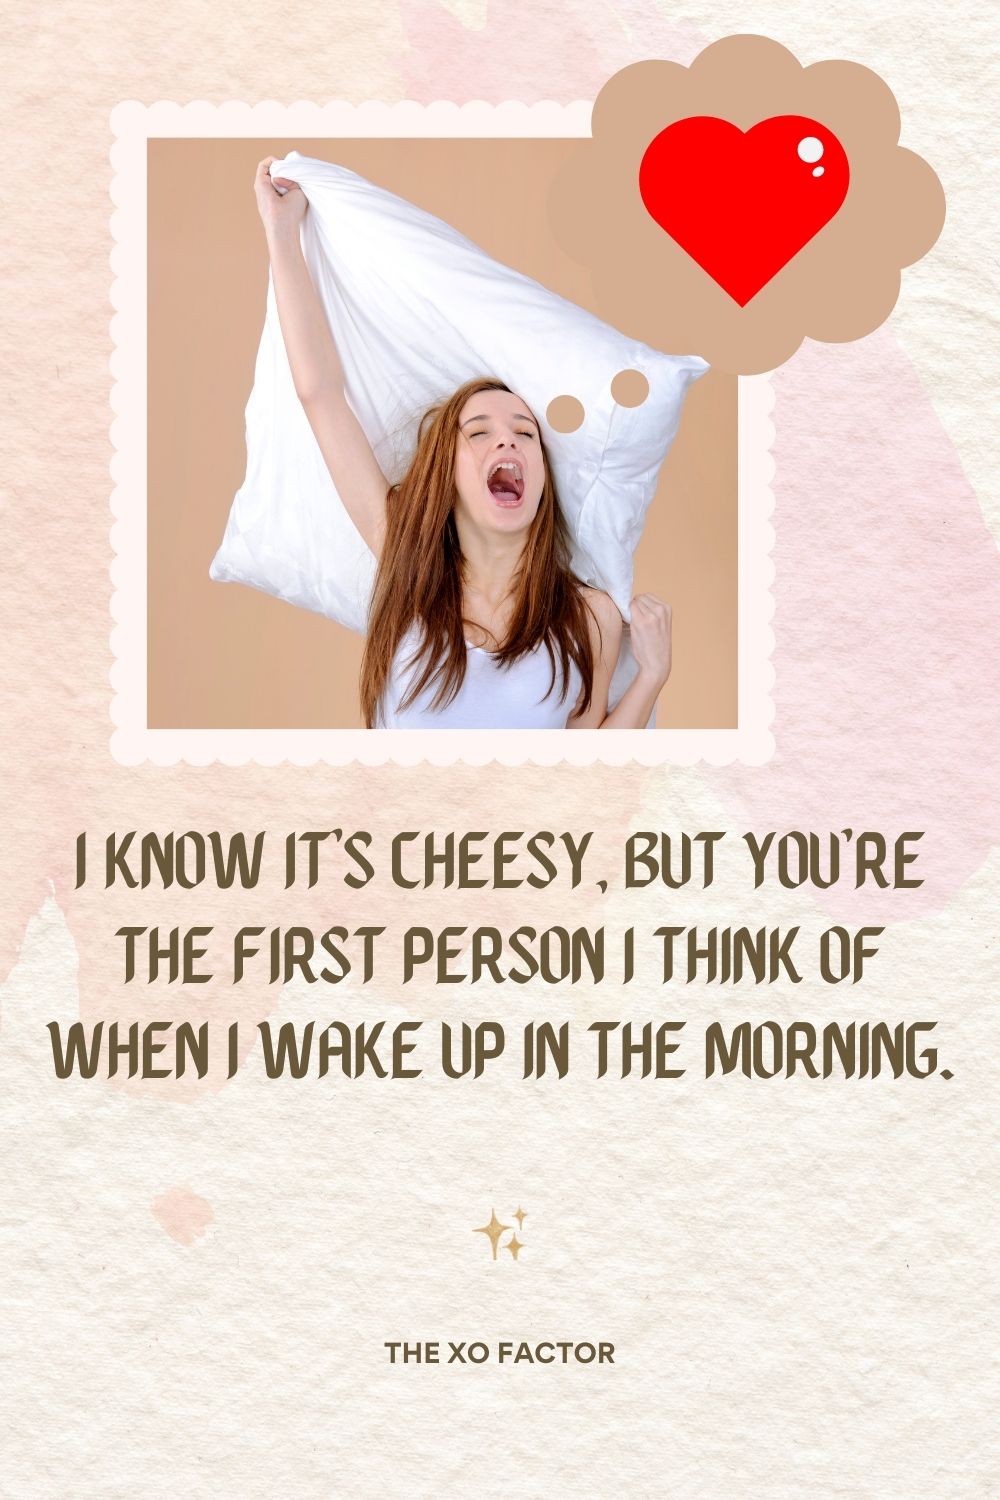 I know it’s cheesy, but you’re the first person I think of when I wake up in the morning.